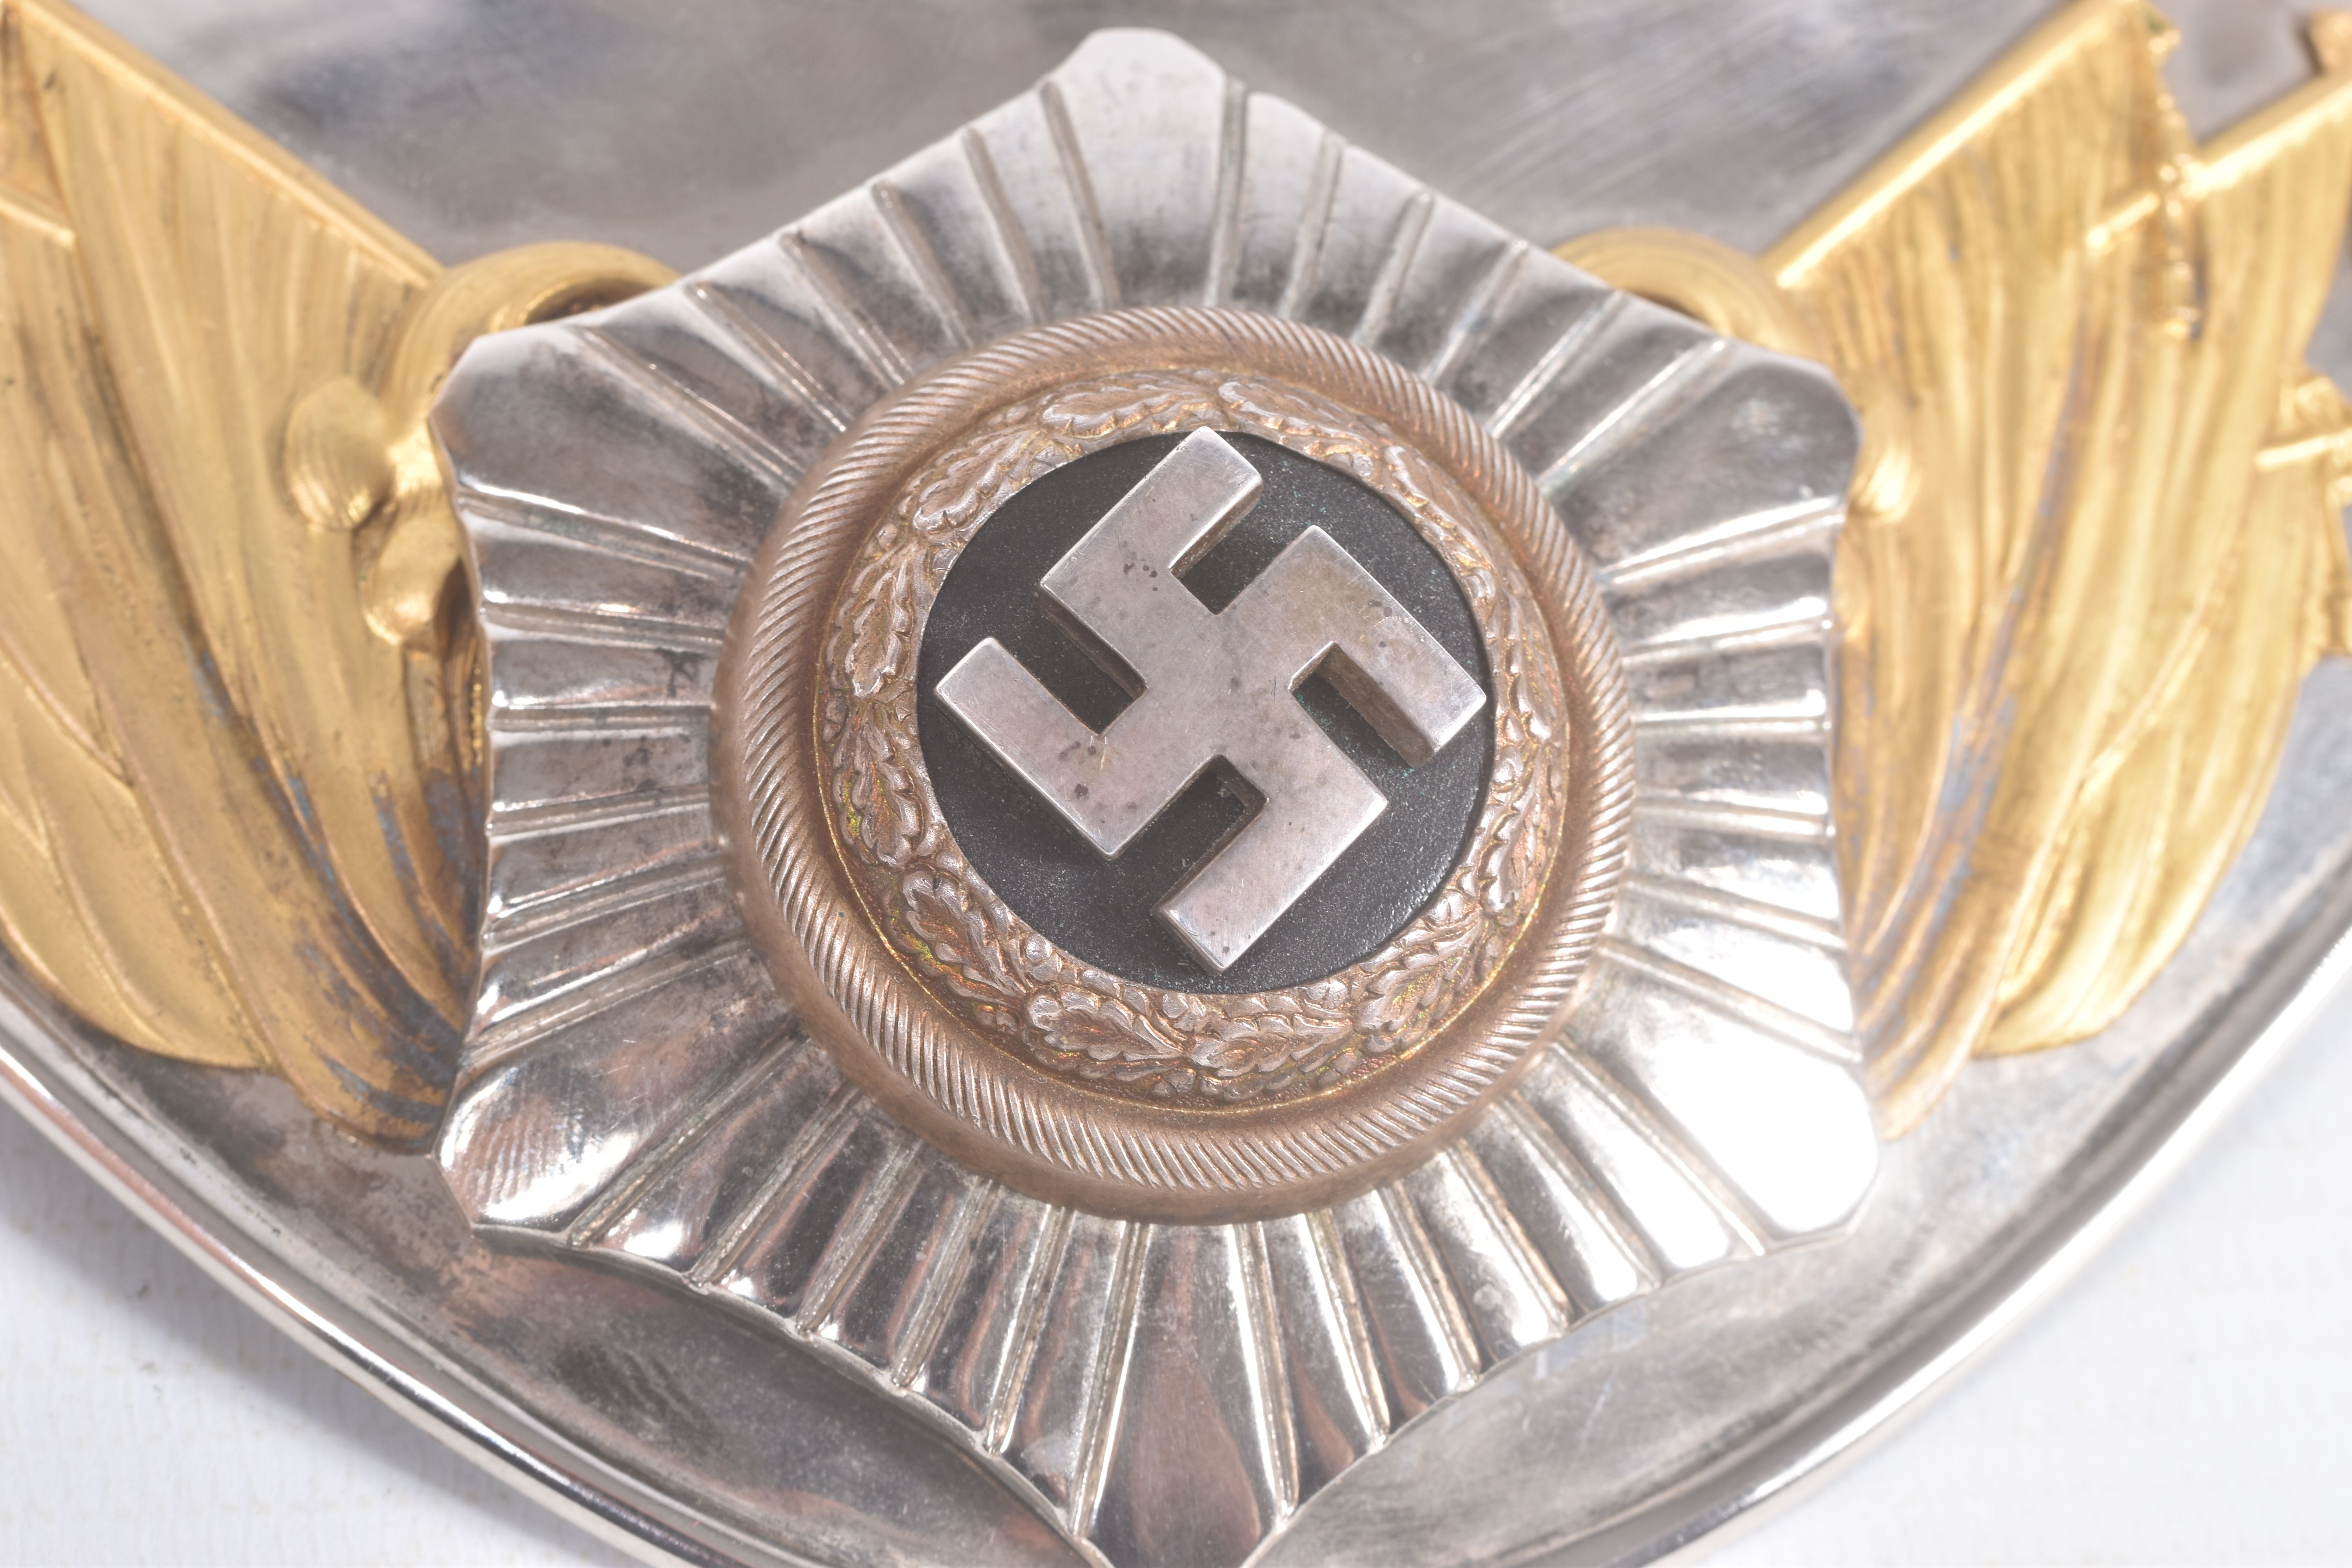 A THIRD REICH GERMANY FLAG BEARERS GORGET, this is a bi coloured metal finish with a prominent - Image 6 of 10